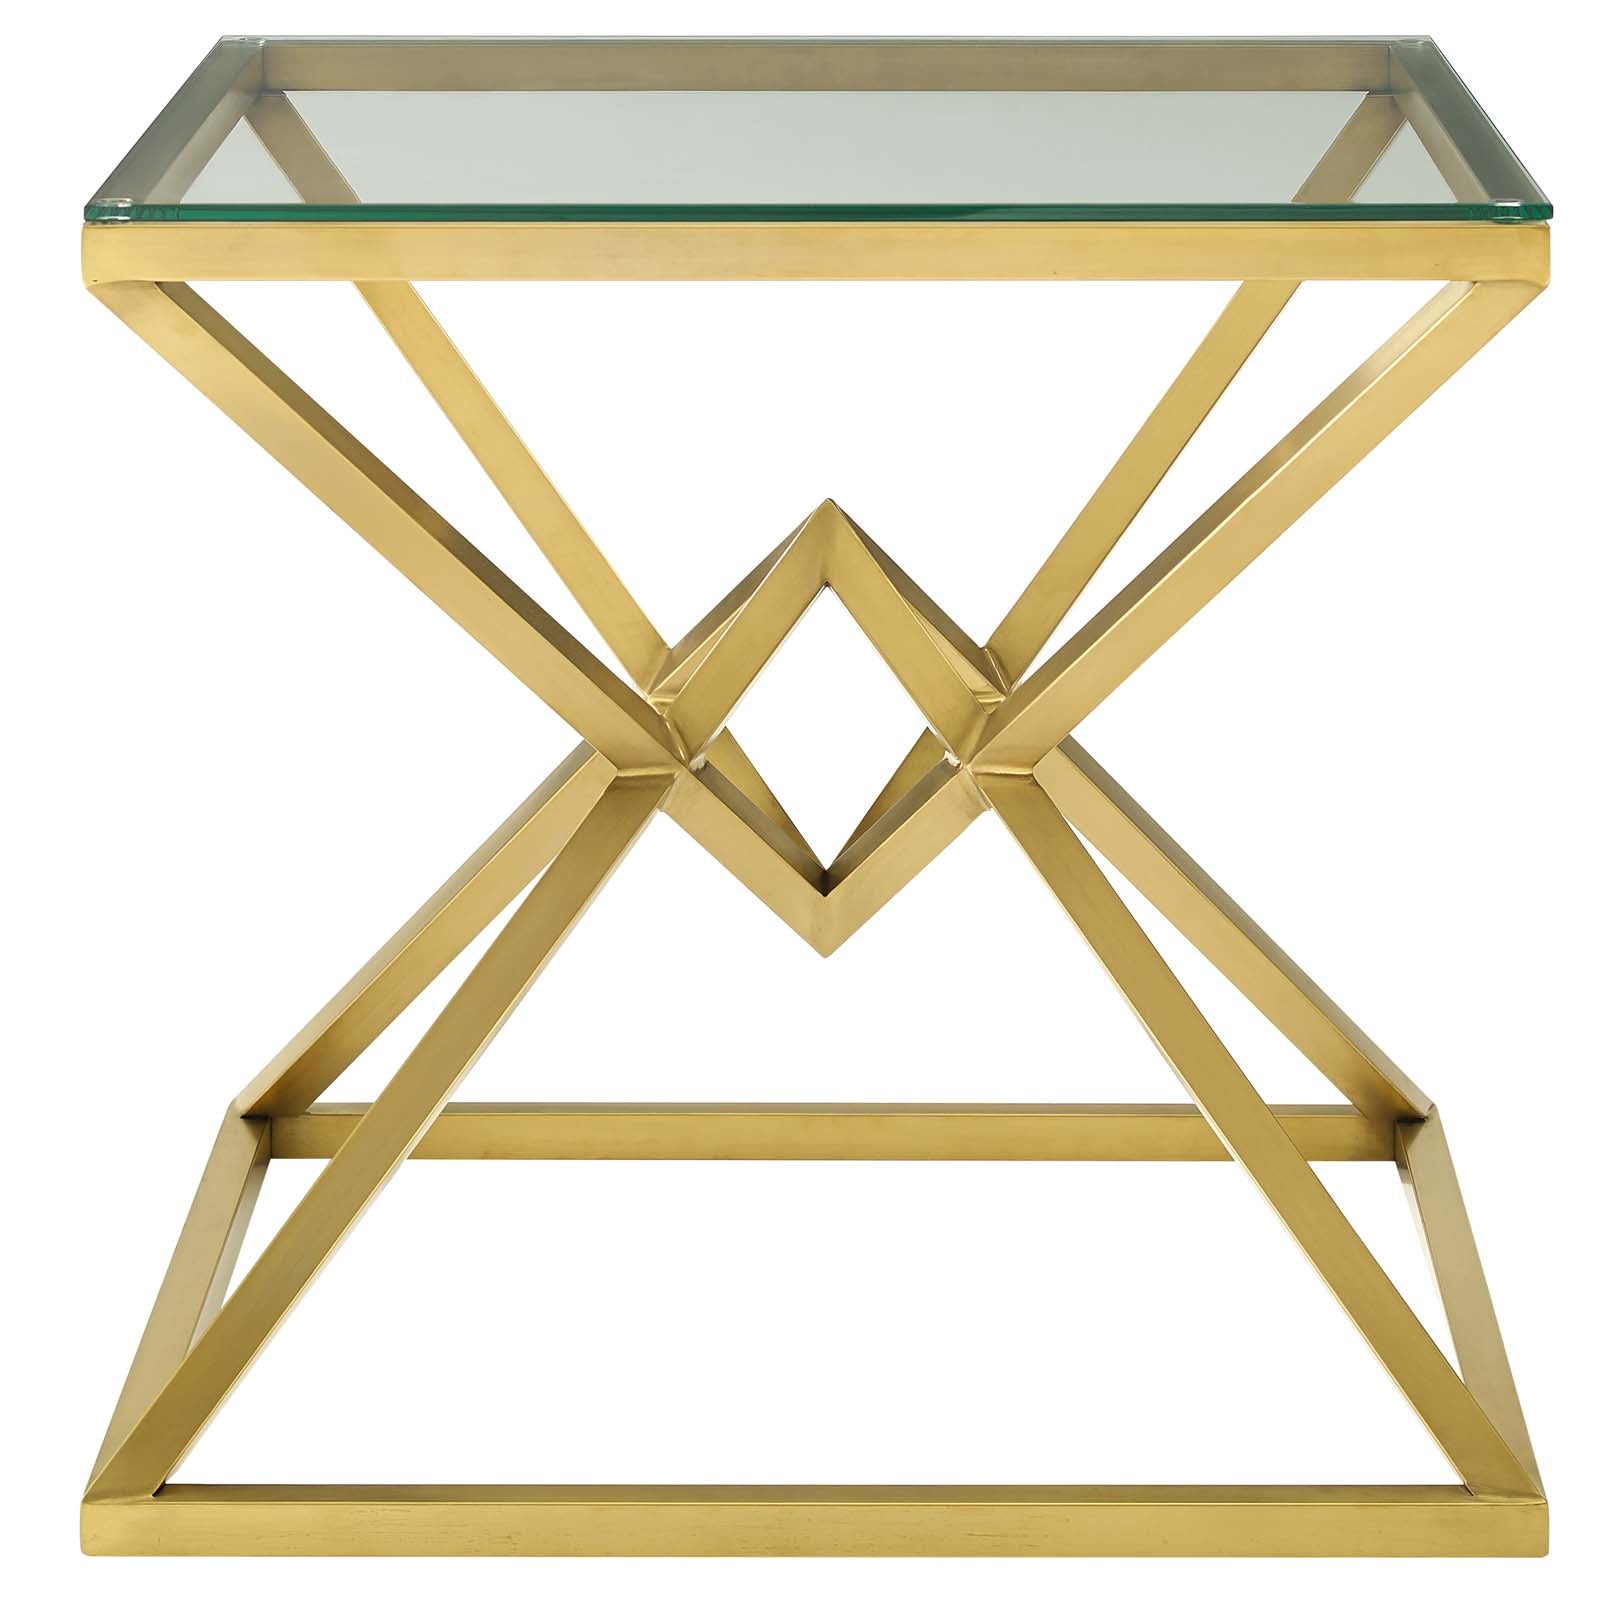 Point 25.5" Brushed Gold Metal Stainless Steel Side Table